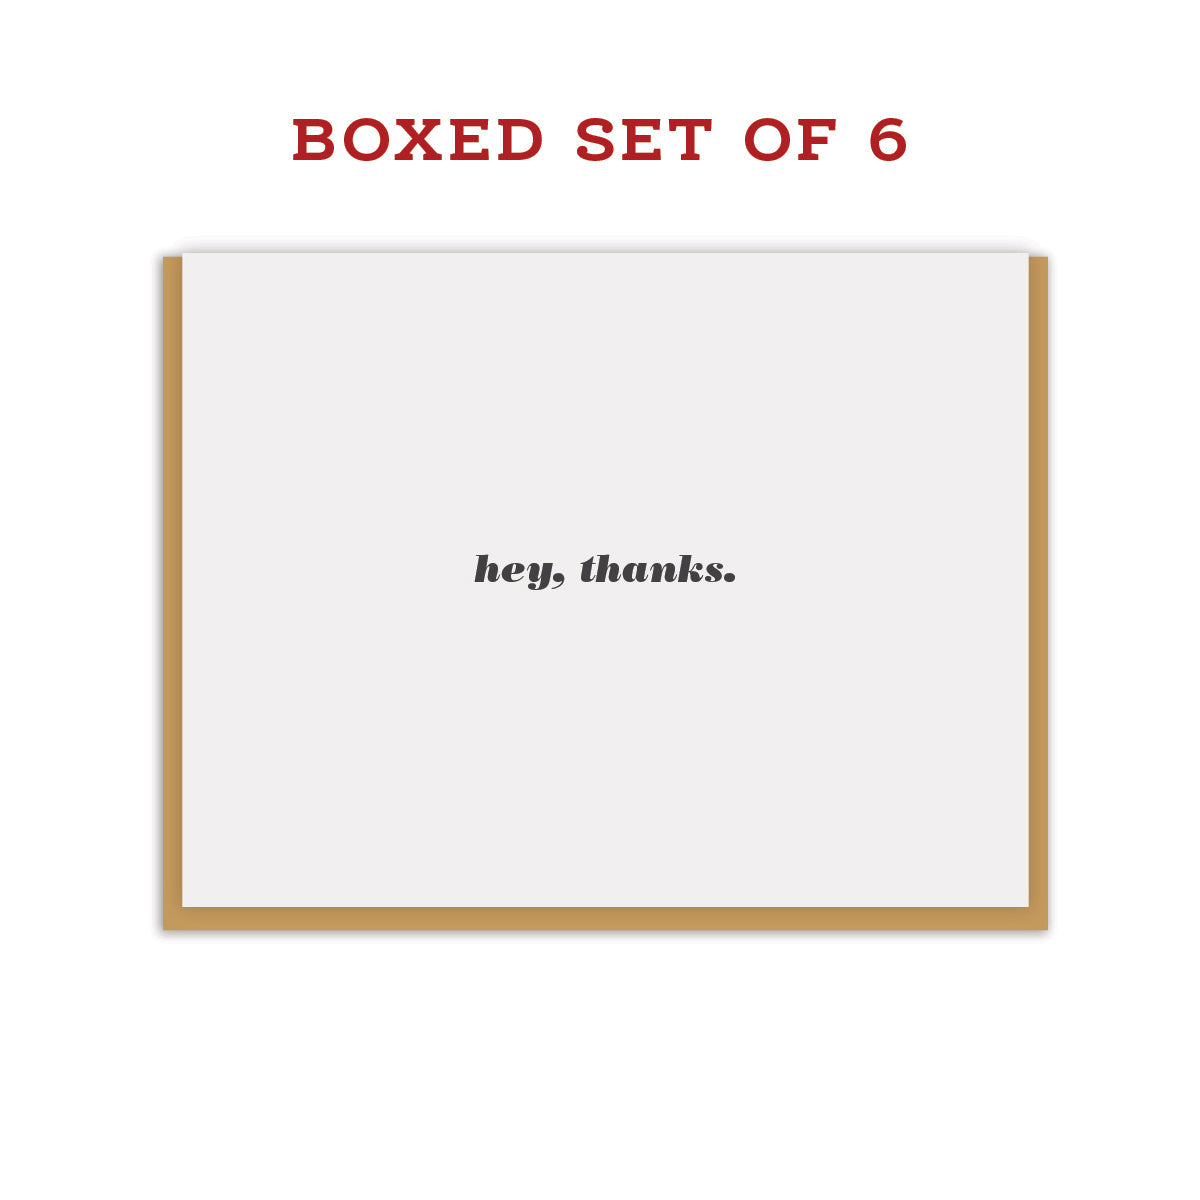 hey, thanks. - Boxed Set of 6